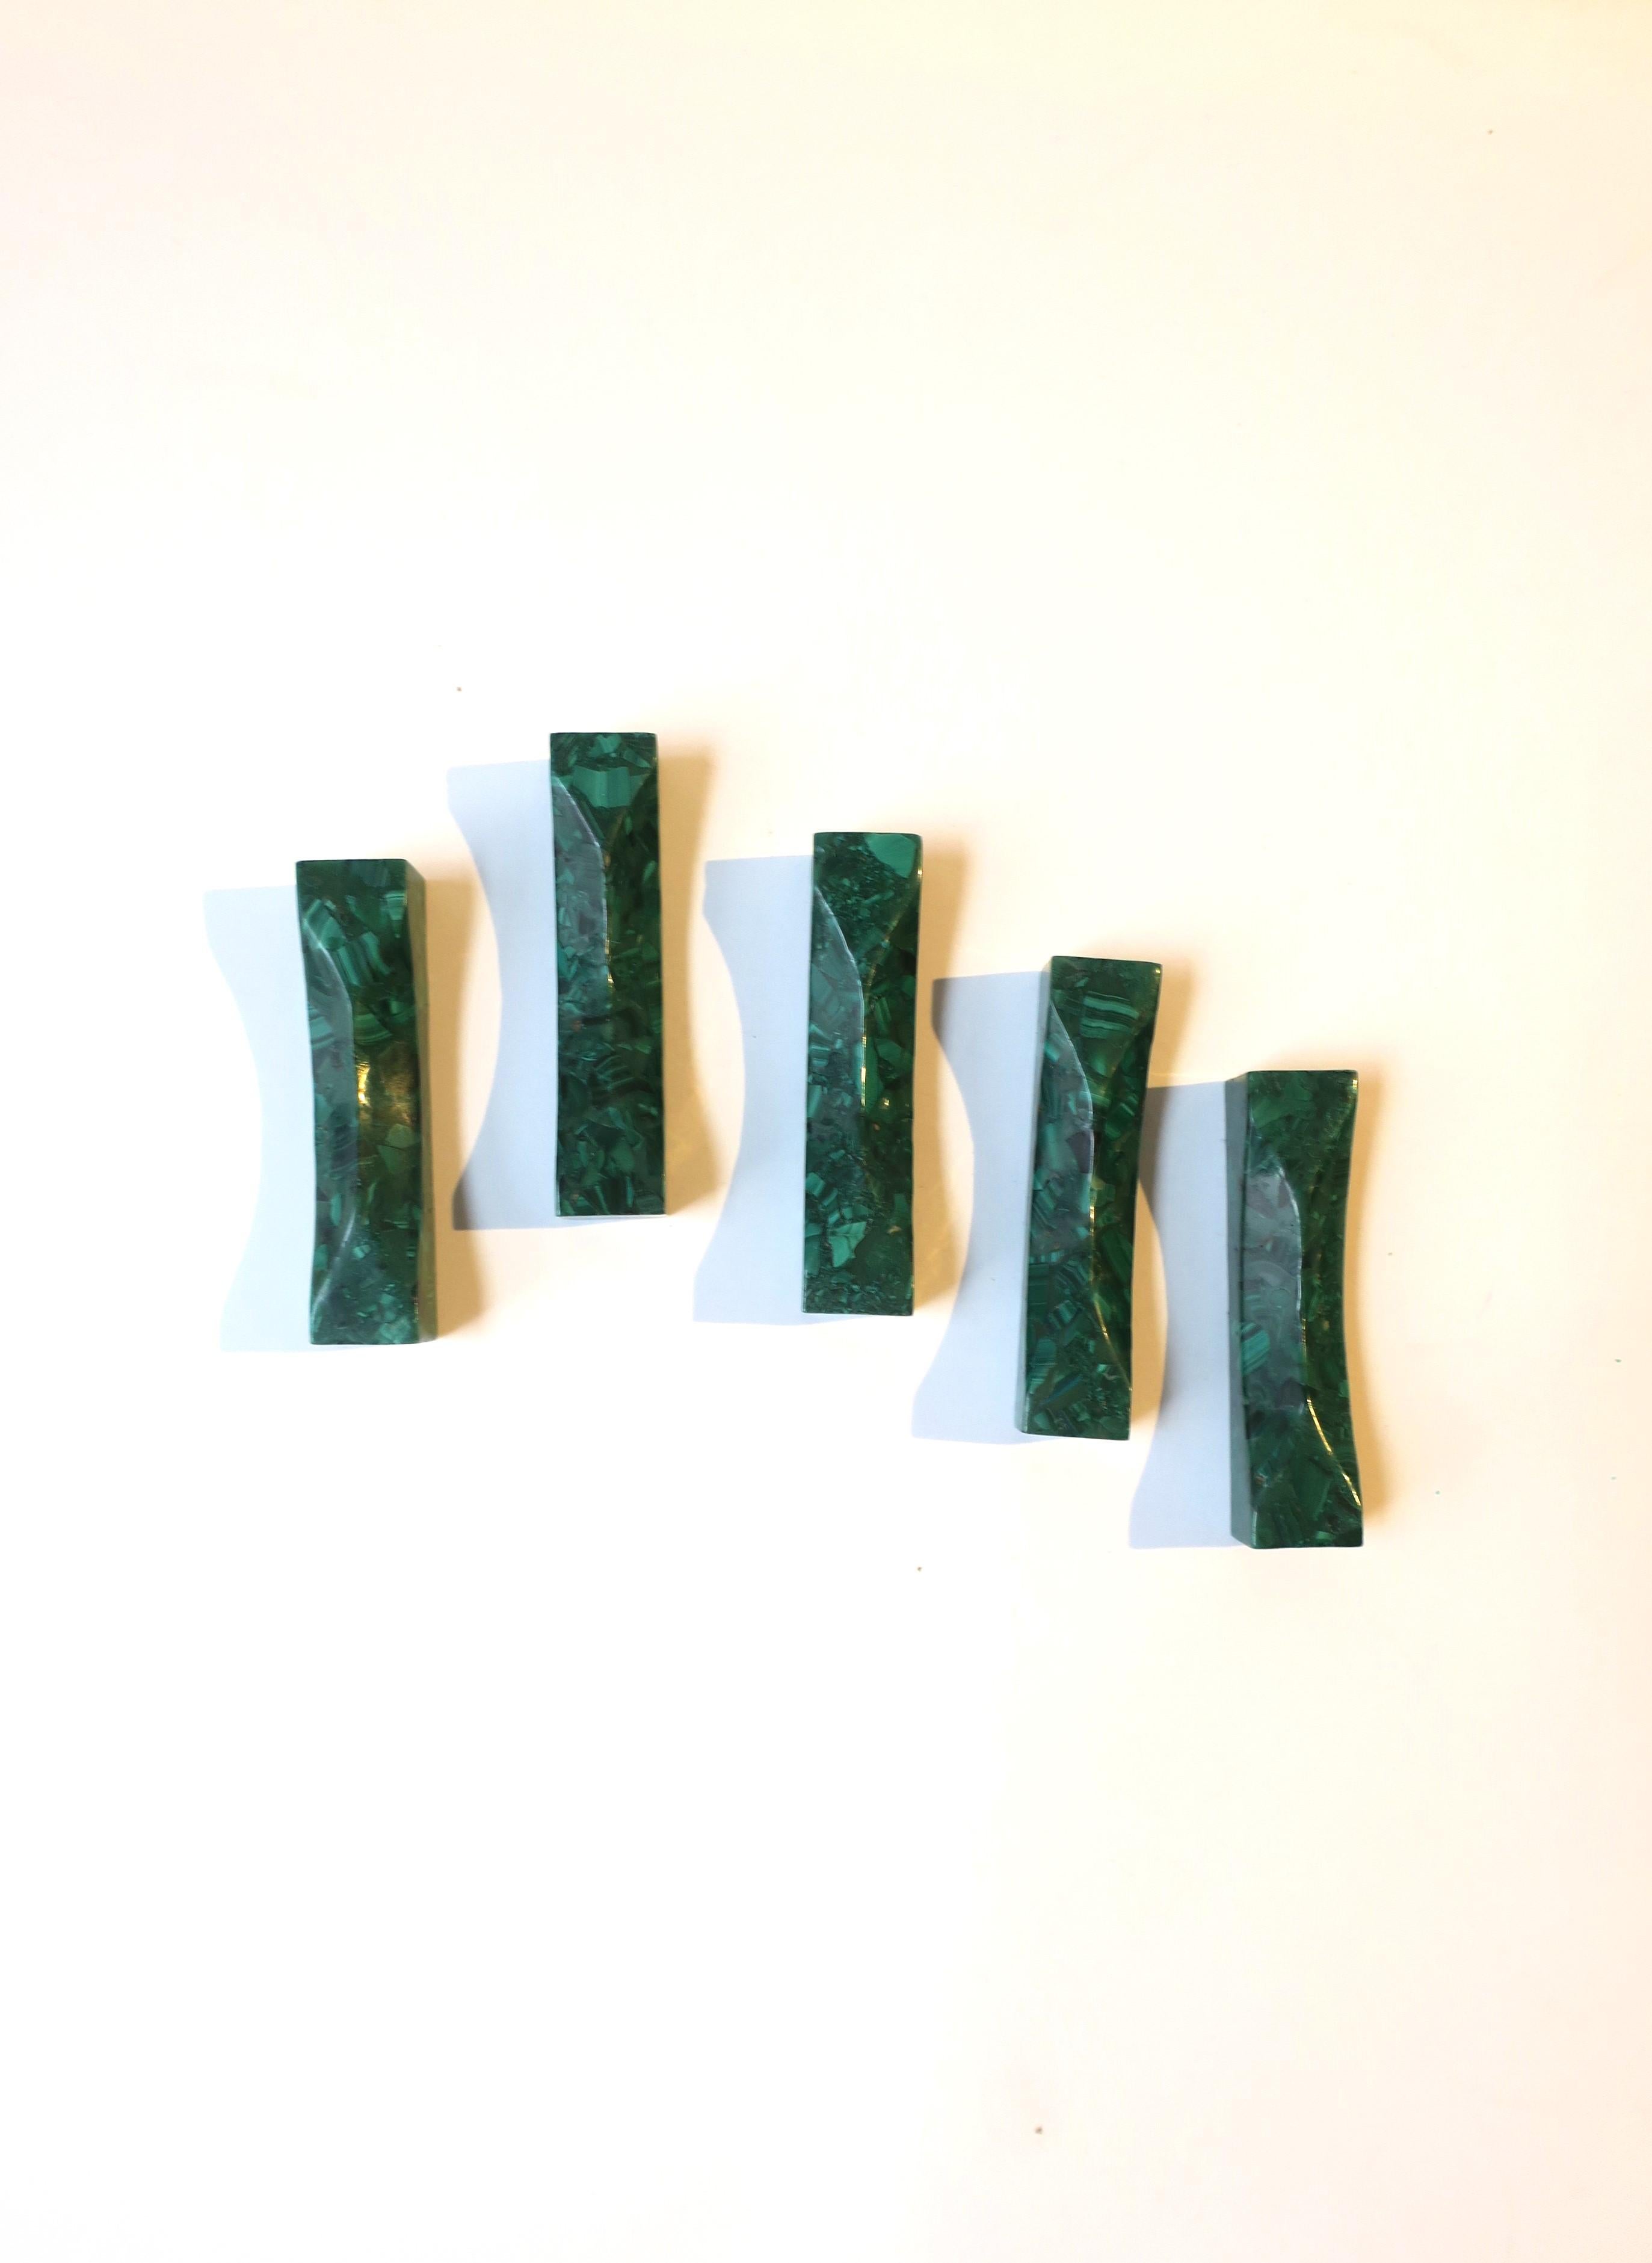 A beautiful and chic set of five (5) natural green malachite utensil rests, circa mid-20th century. Shown in images supporting a knife and soup spoon. A rare set. A great hostess gift. A special set for the ultimate entertaining environment.